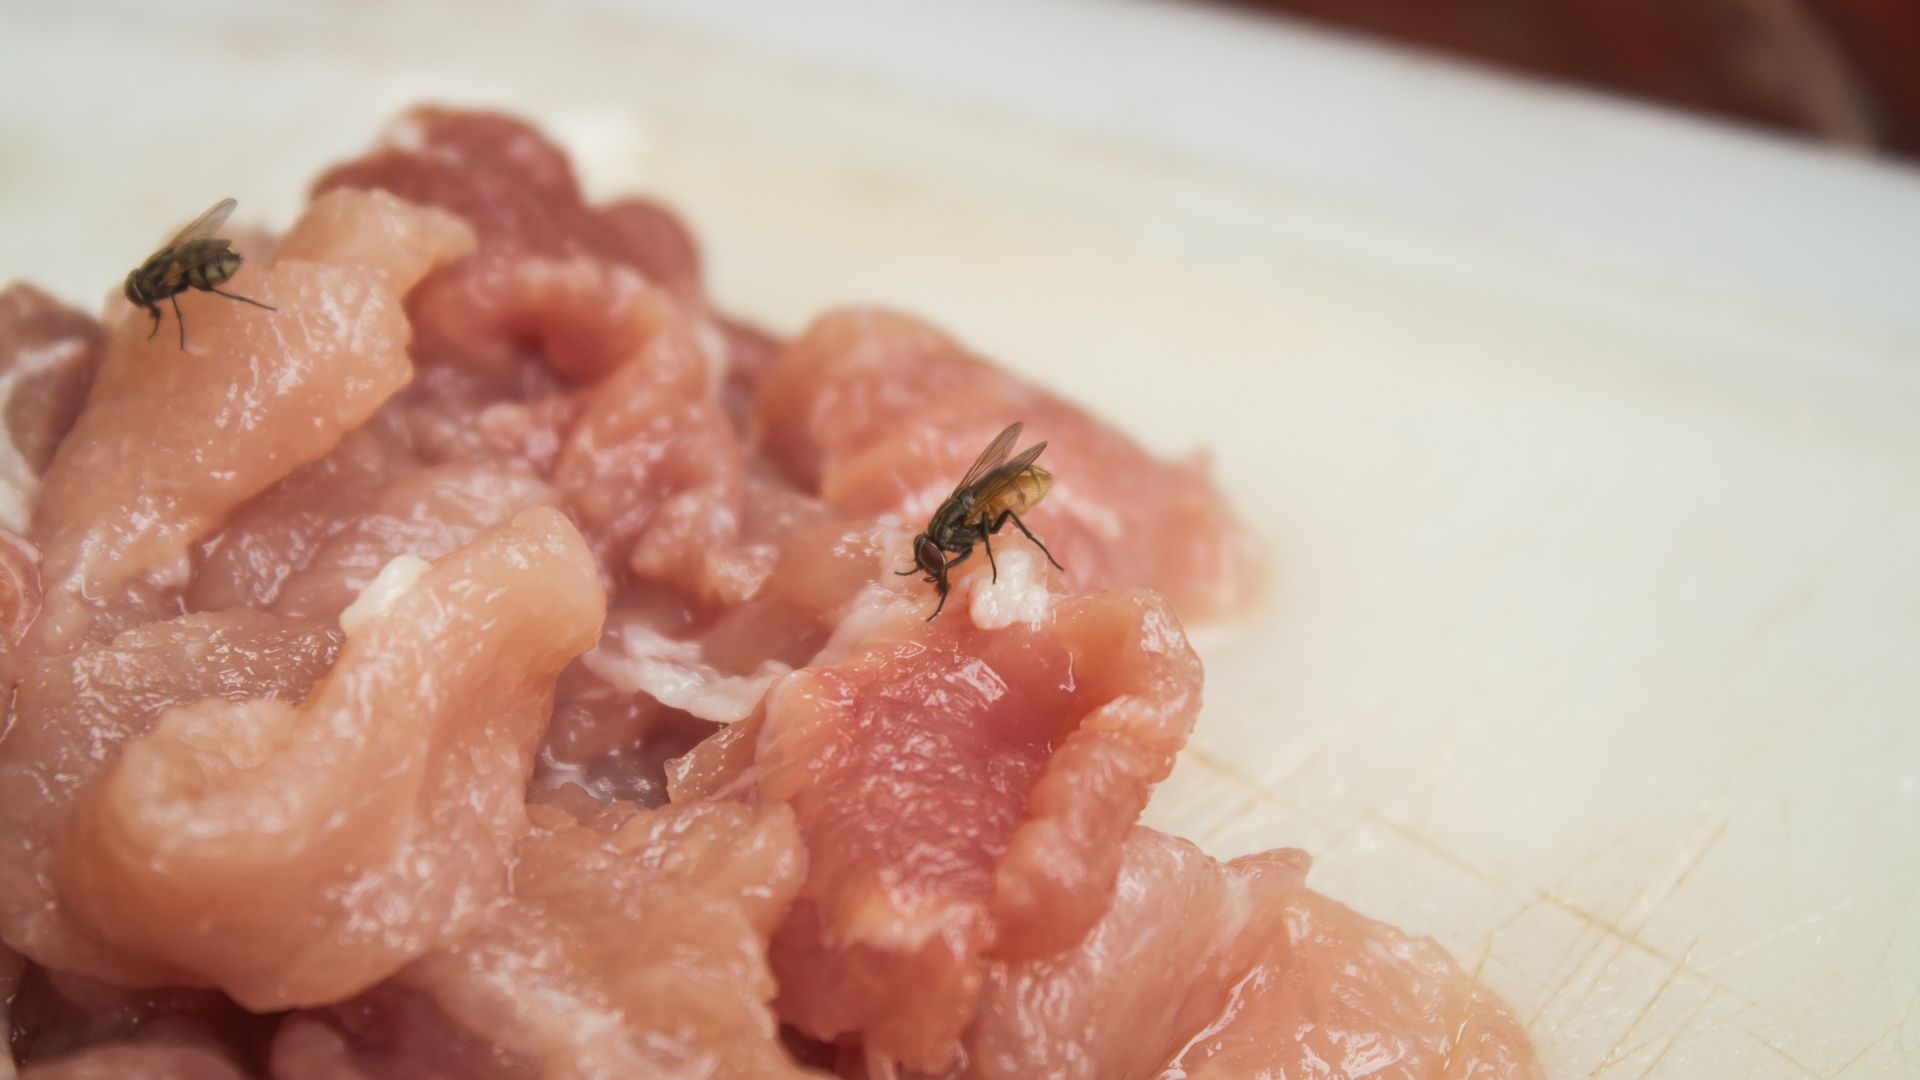 An image of flies feeding on raw chicken meat.